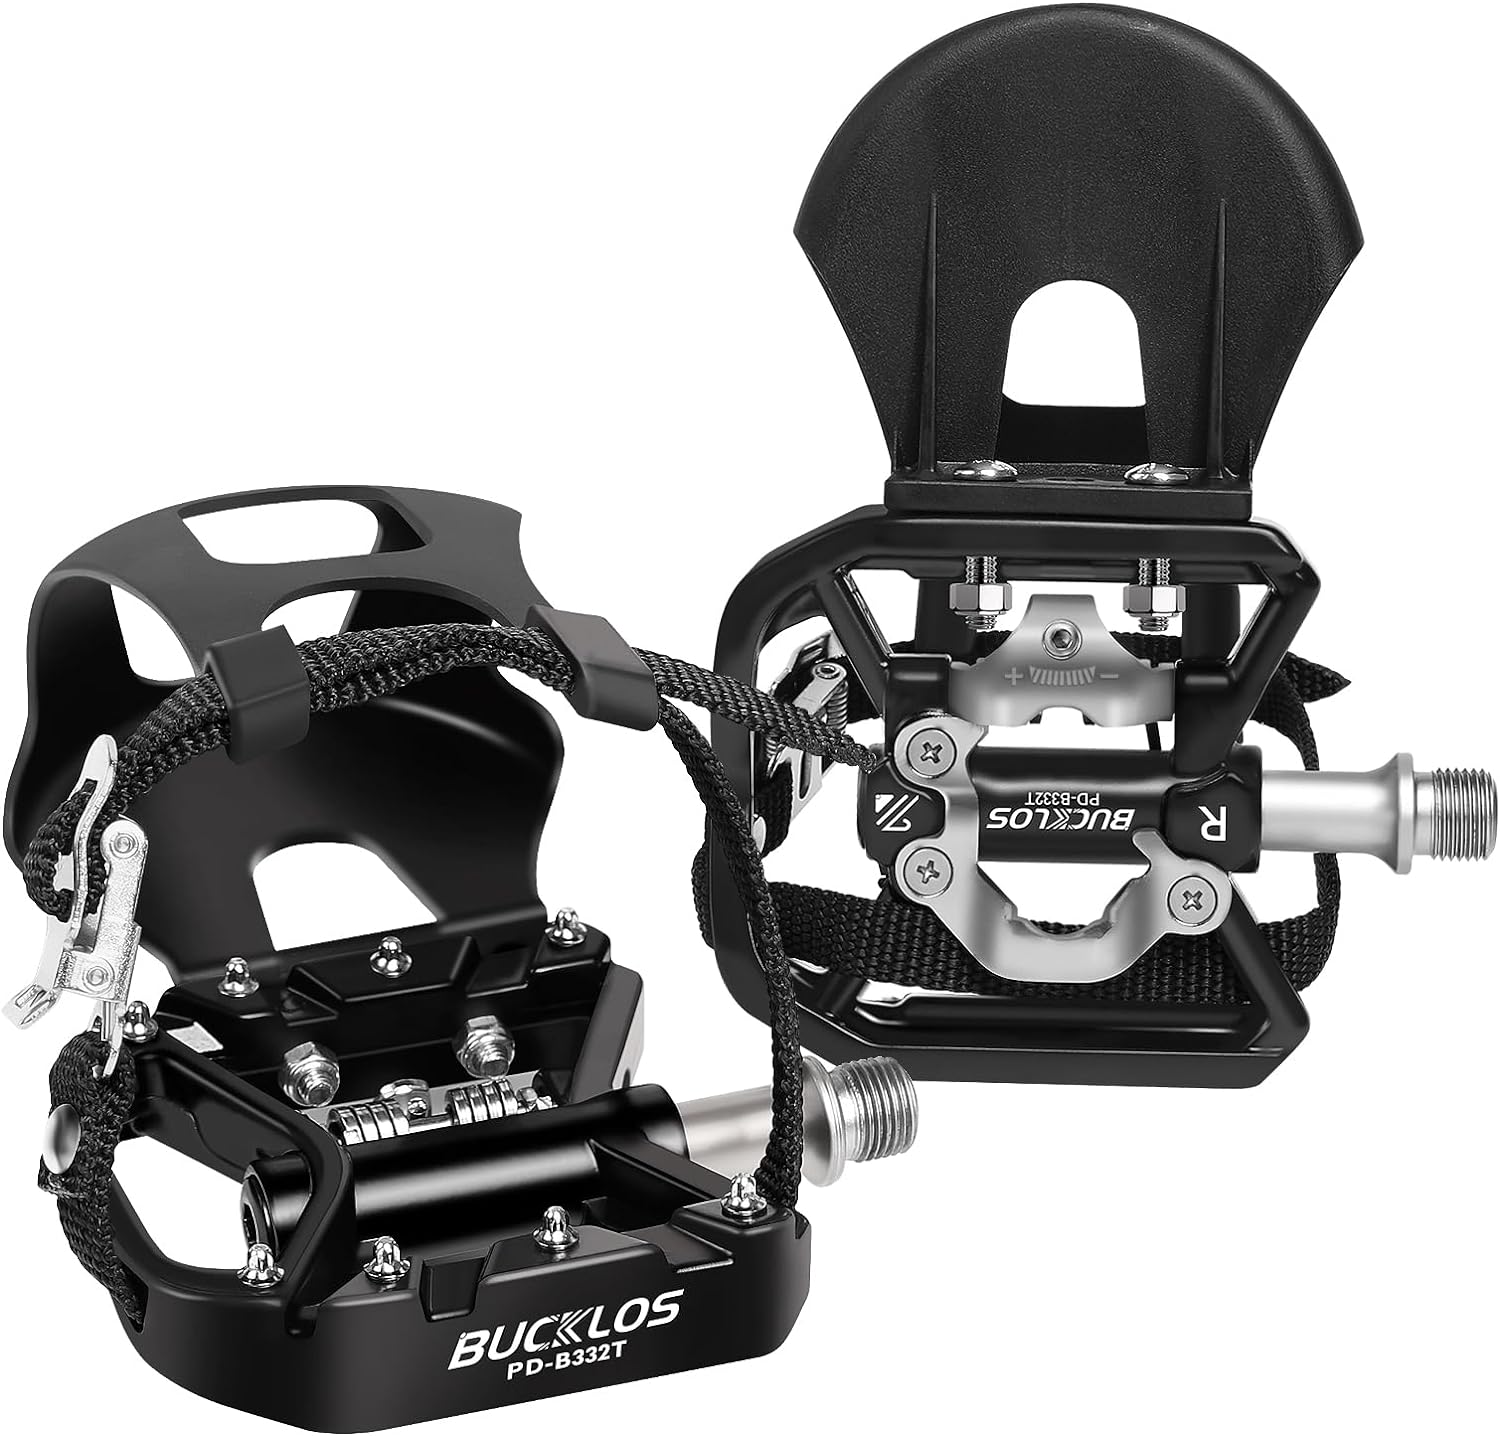 Bucklos Bike Pedals with Toe Cages and Straps